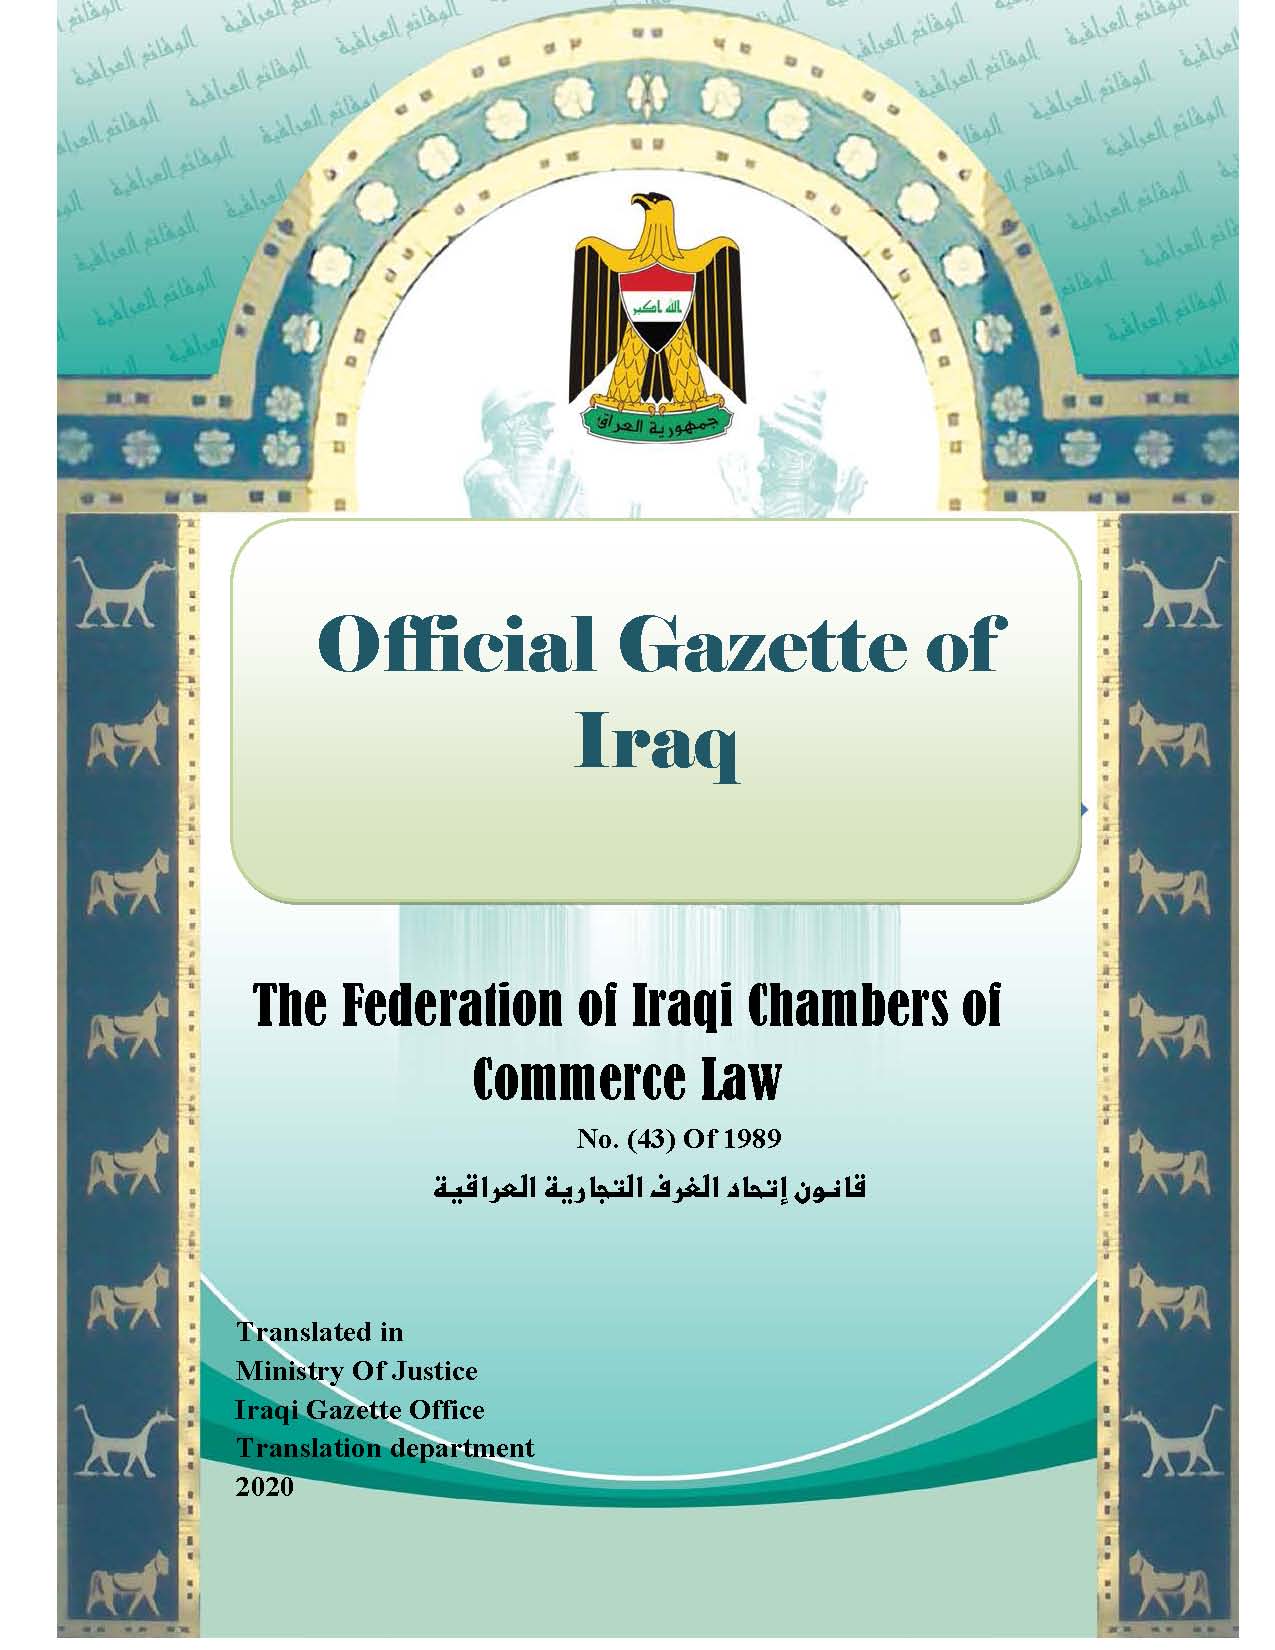 The Federation of Iraqi Chambers of Commerce Law 